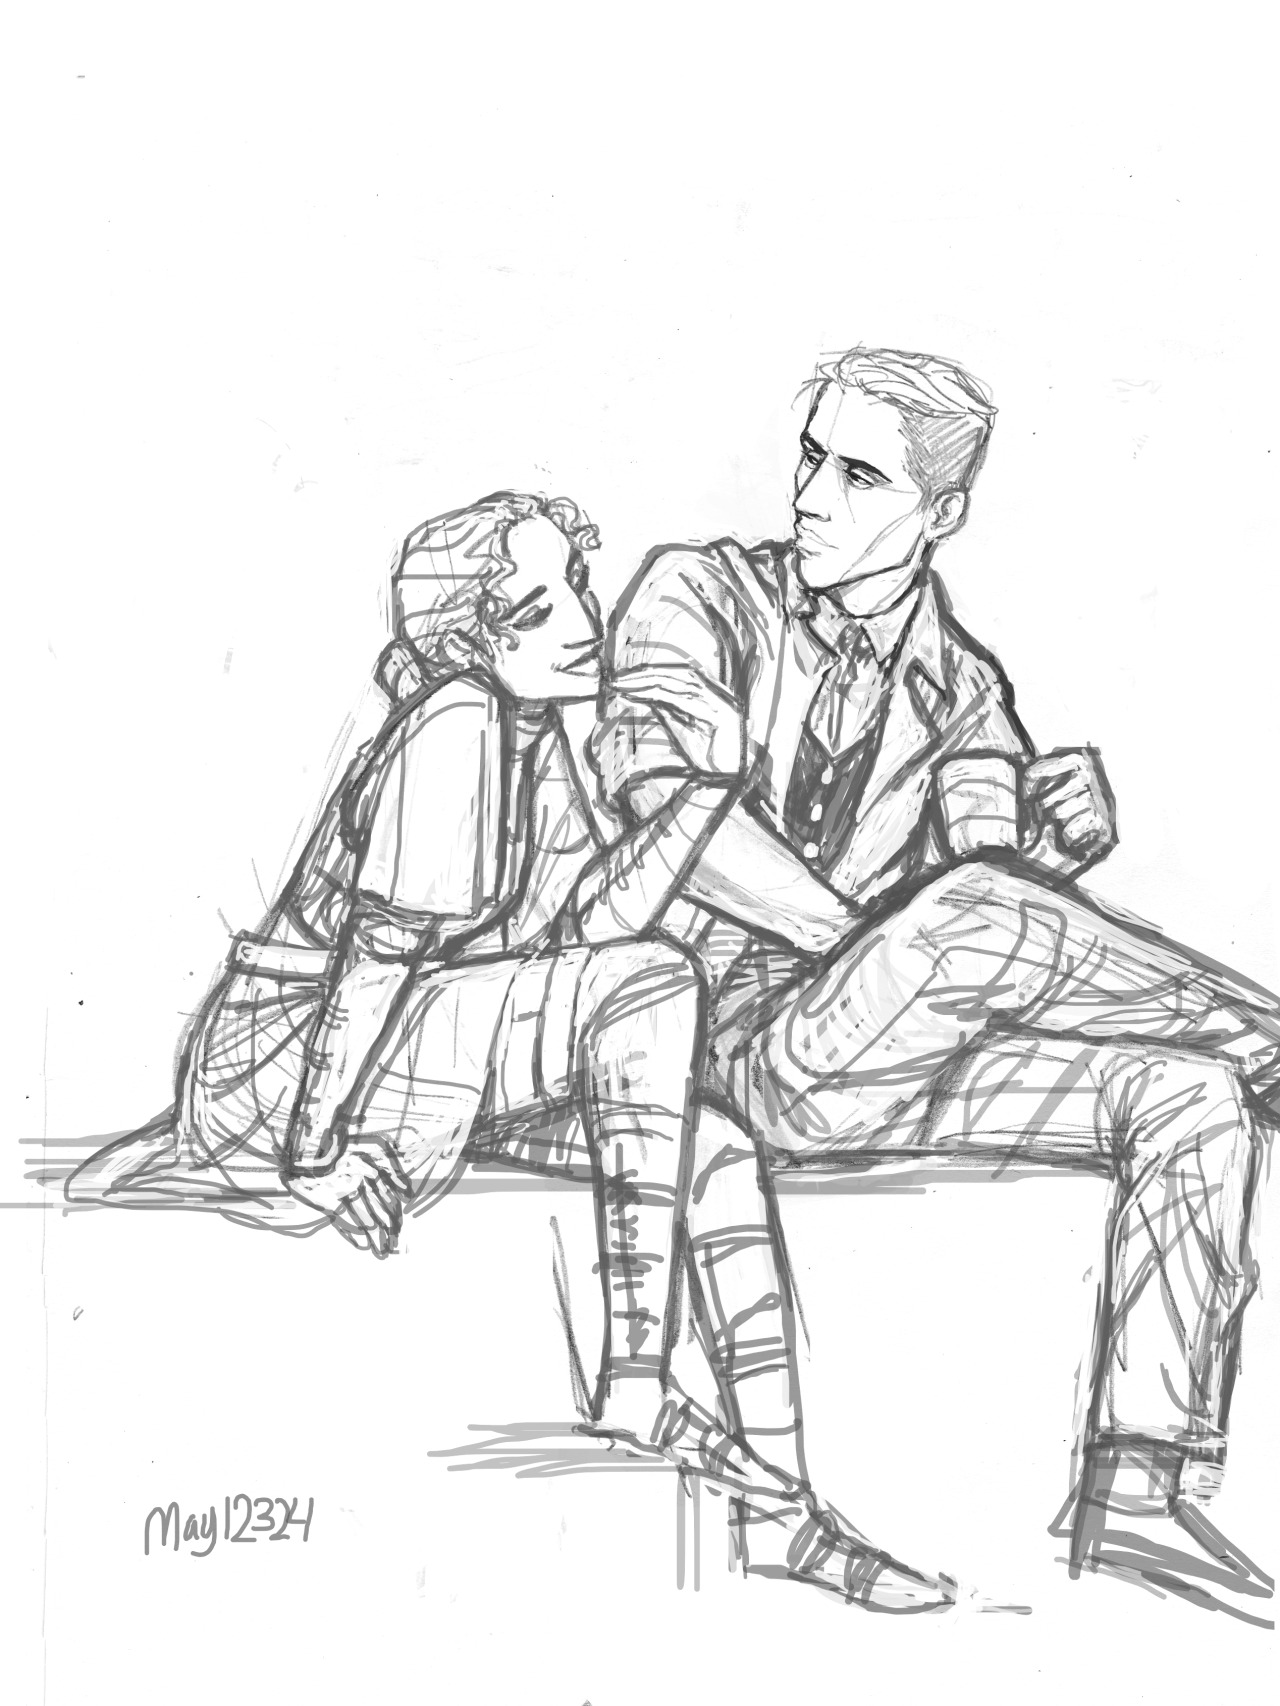 lbardugo:
“may12324:
“Inej and Kaz for triplepooptard. One of the prizes from my recent follower giveaway. The prompt was eating cake, but I figure Kaz would be more inclined to drinking coffee and just watching Inej eat cake.
”
I love this! And I...